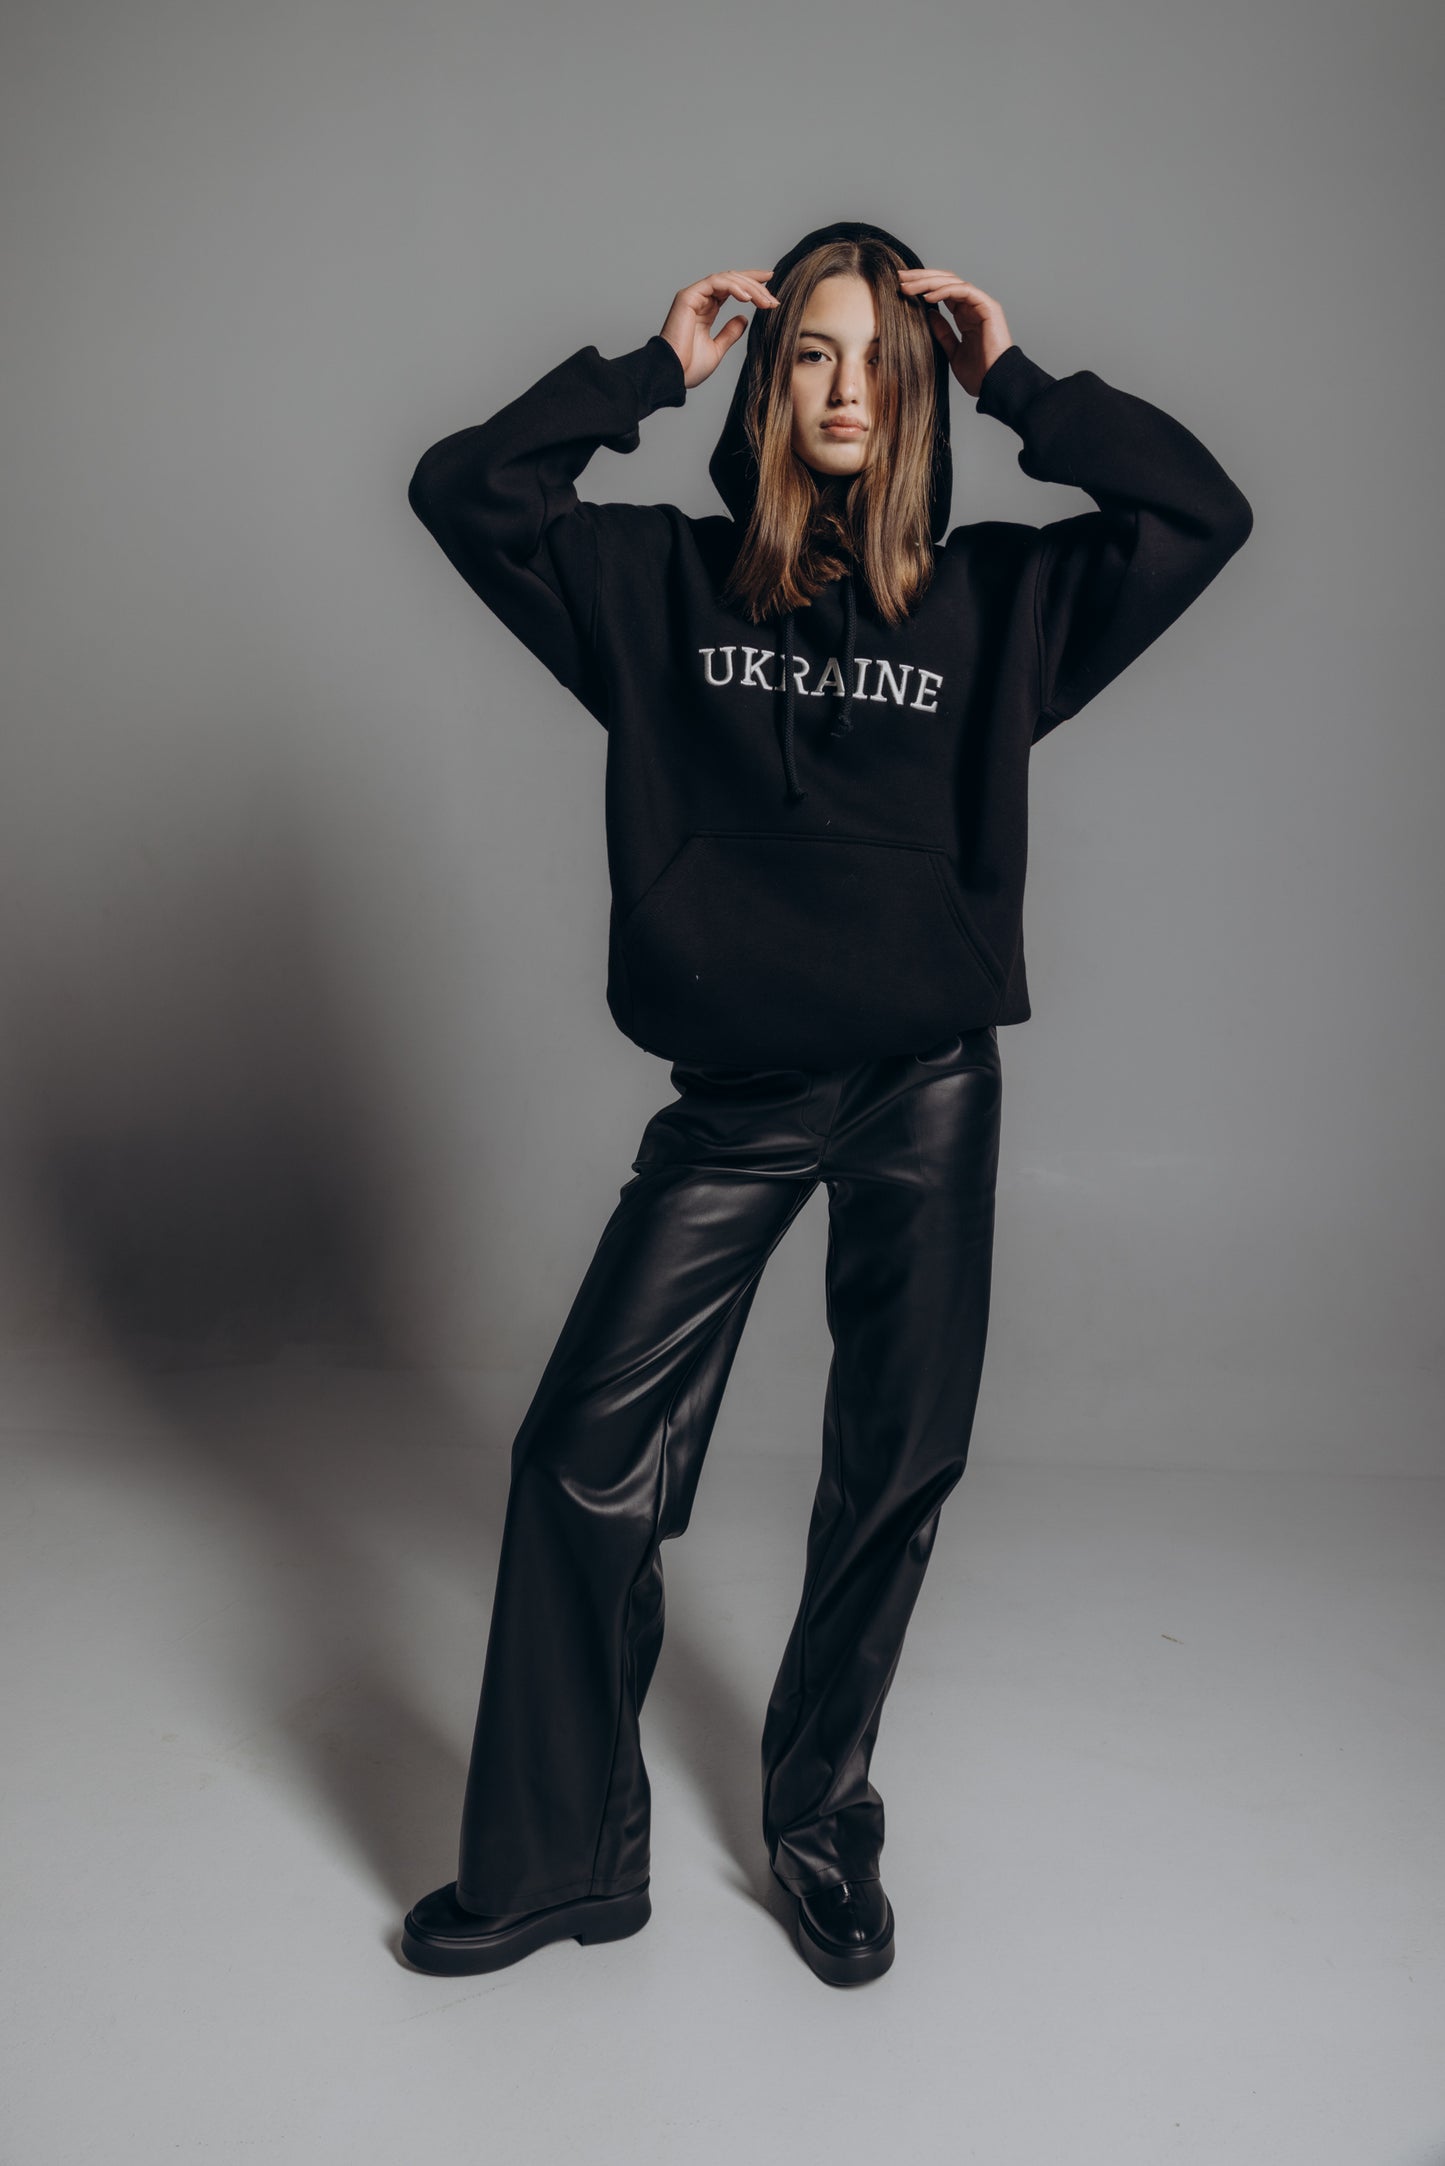 Hoodie with embroidery "UKRAINE"